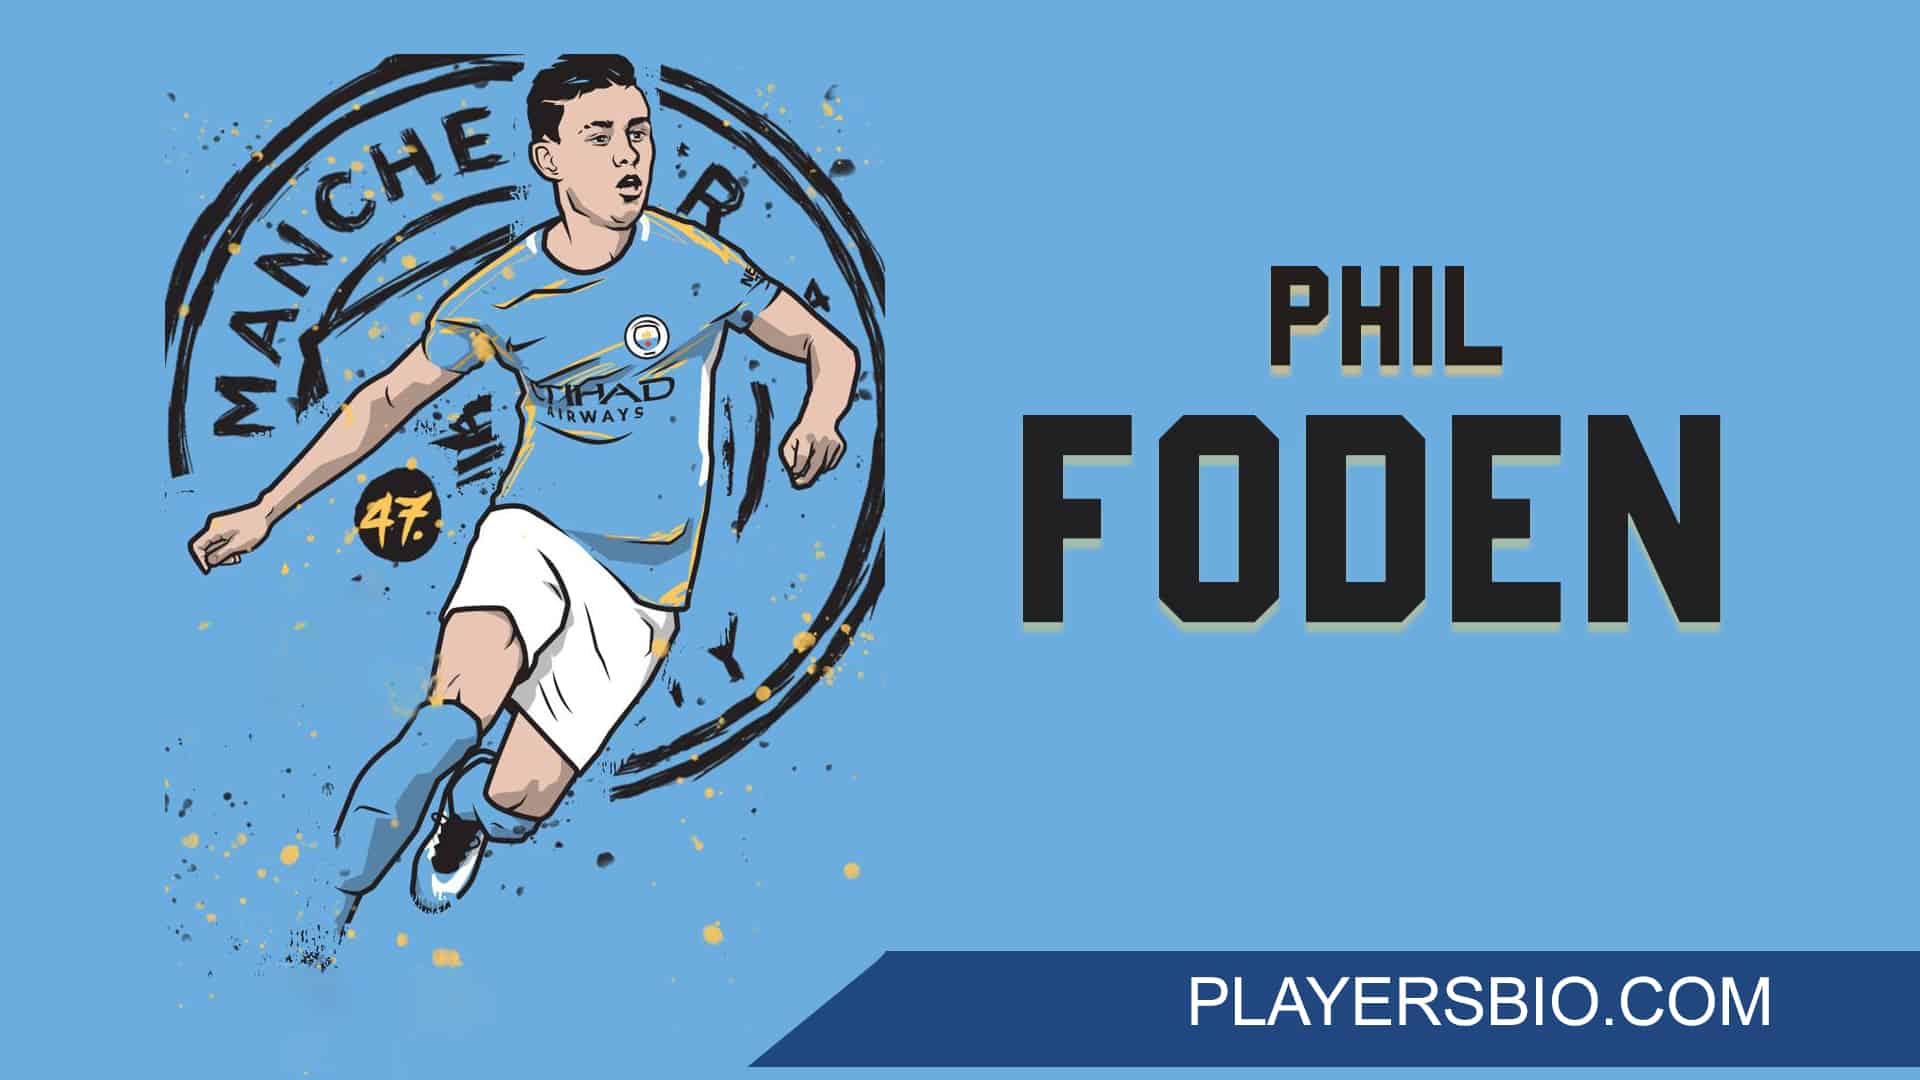 Phil Foden Bio [2022 Update]: Wife, Son, Stats, Career & Net Worth